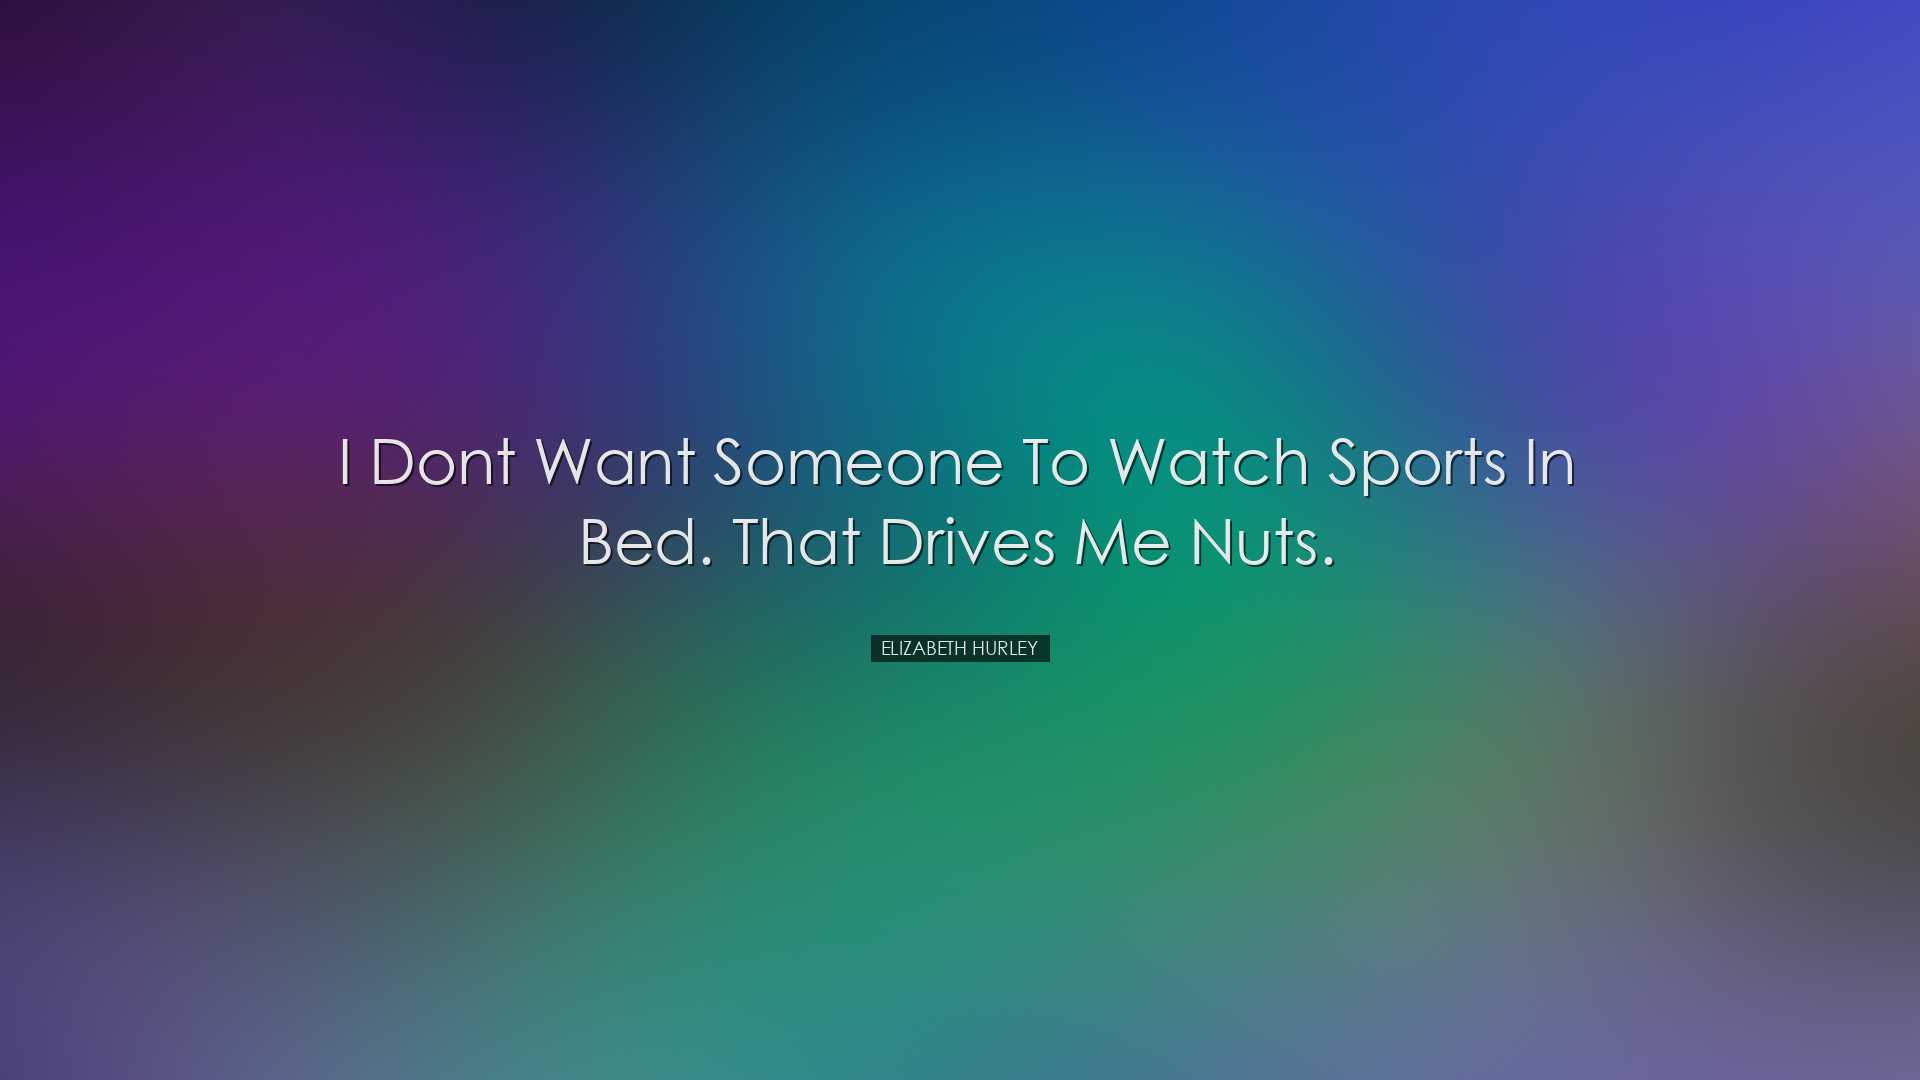 I dont want someone to watch sports in bed. That drives me nuts. -